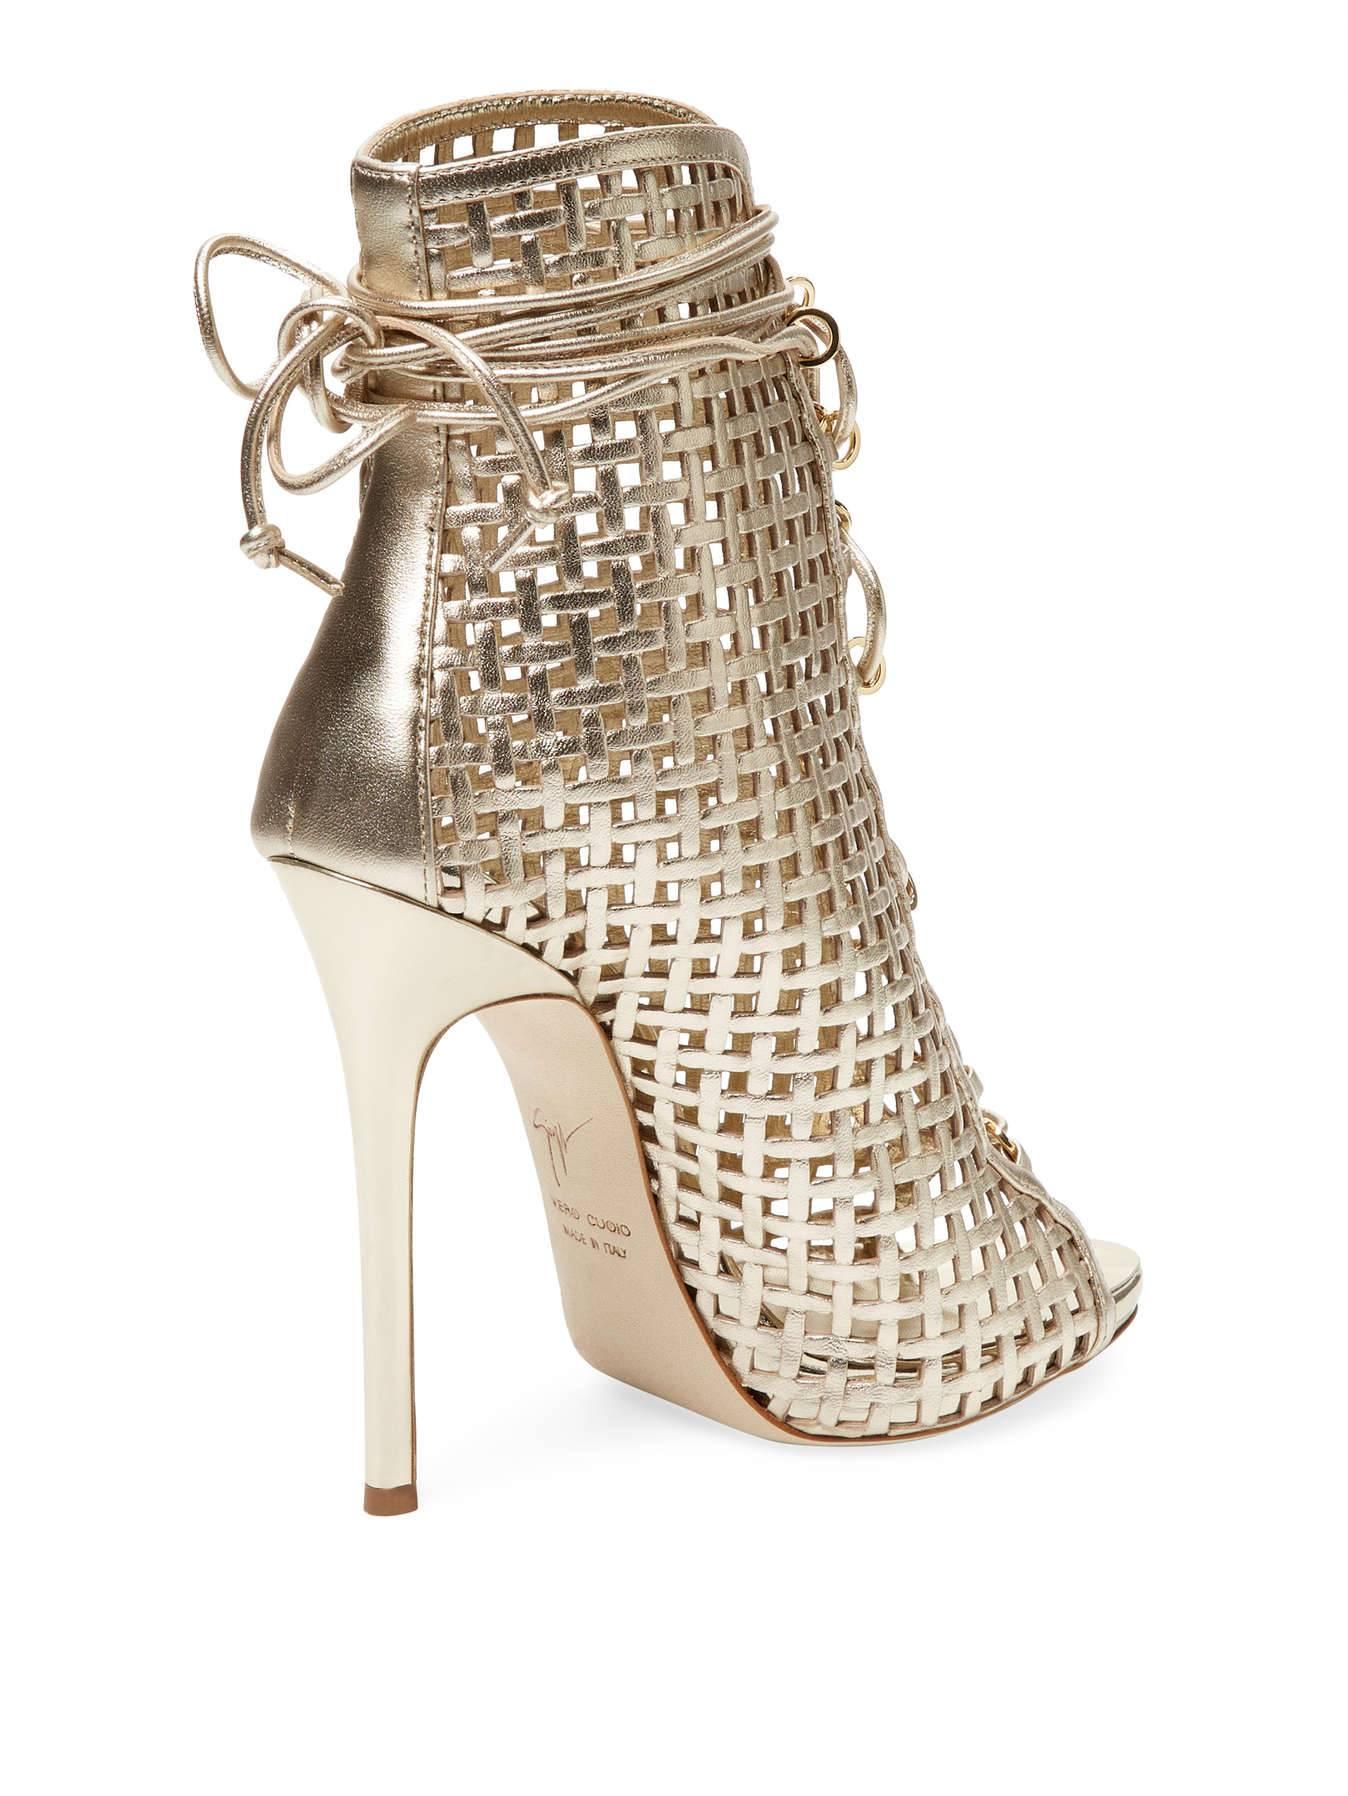 Giuseppe Zanotti New Gold Basketweave Ankle Booties Boots W/Box In New Condition In Chicago, IL